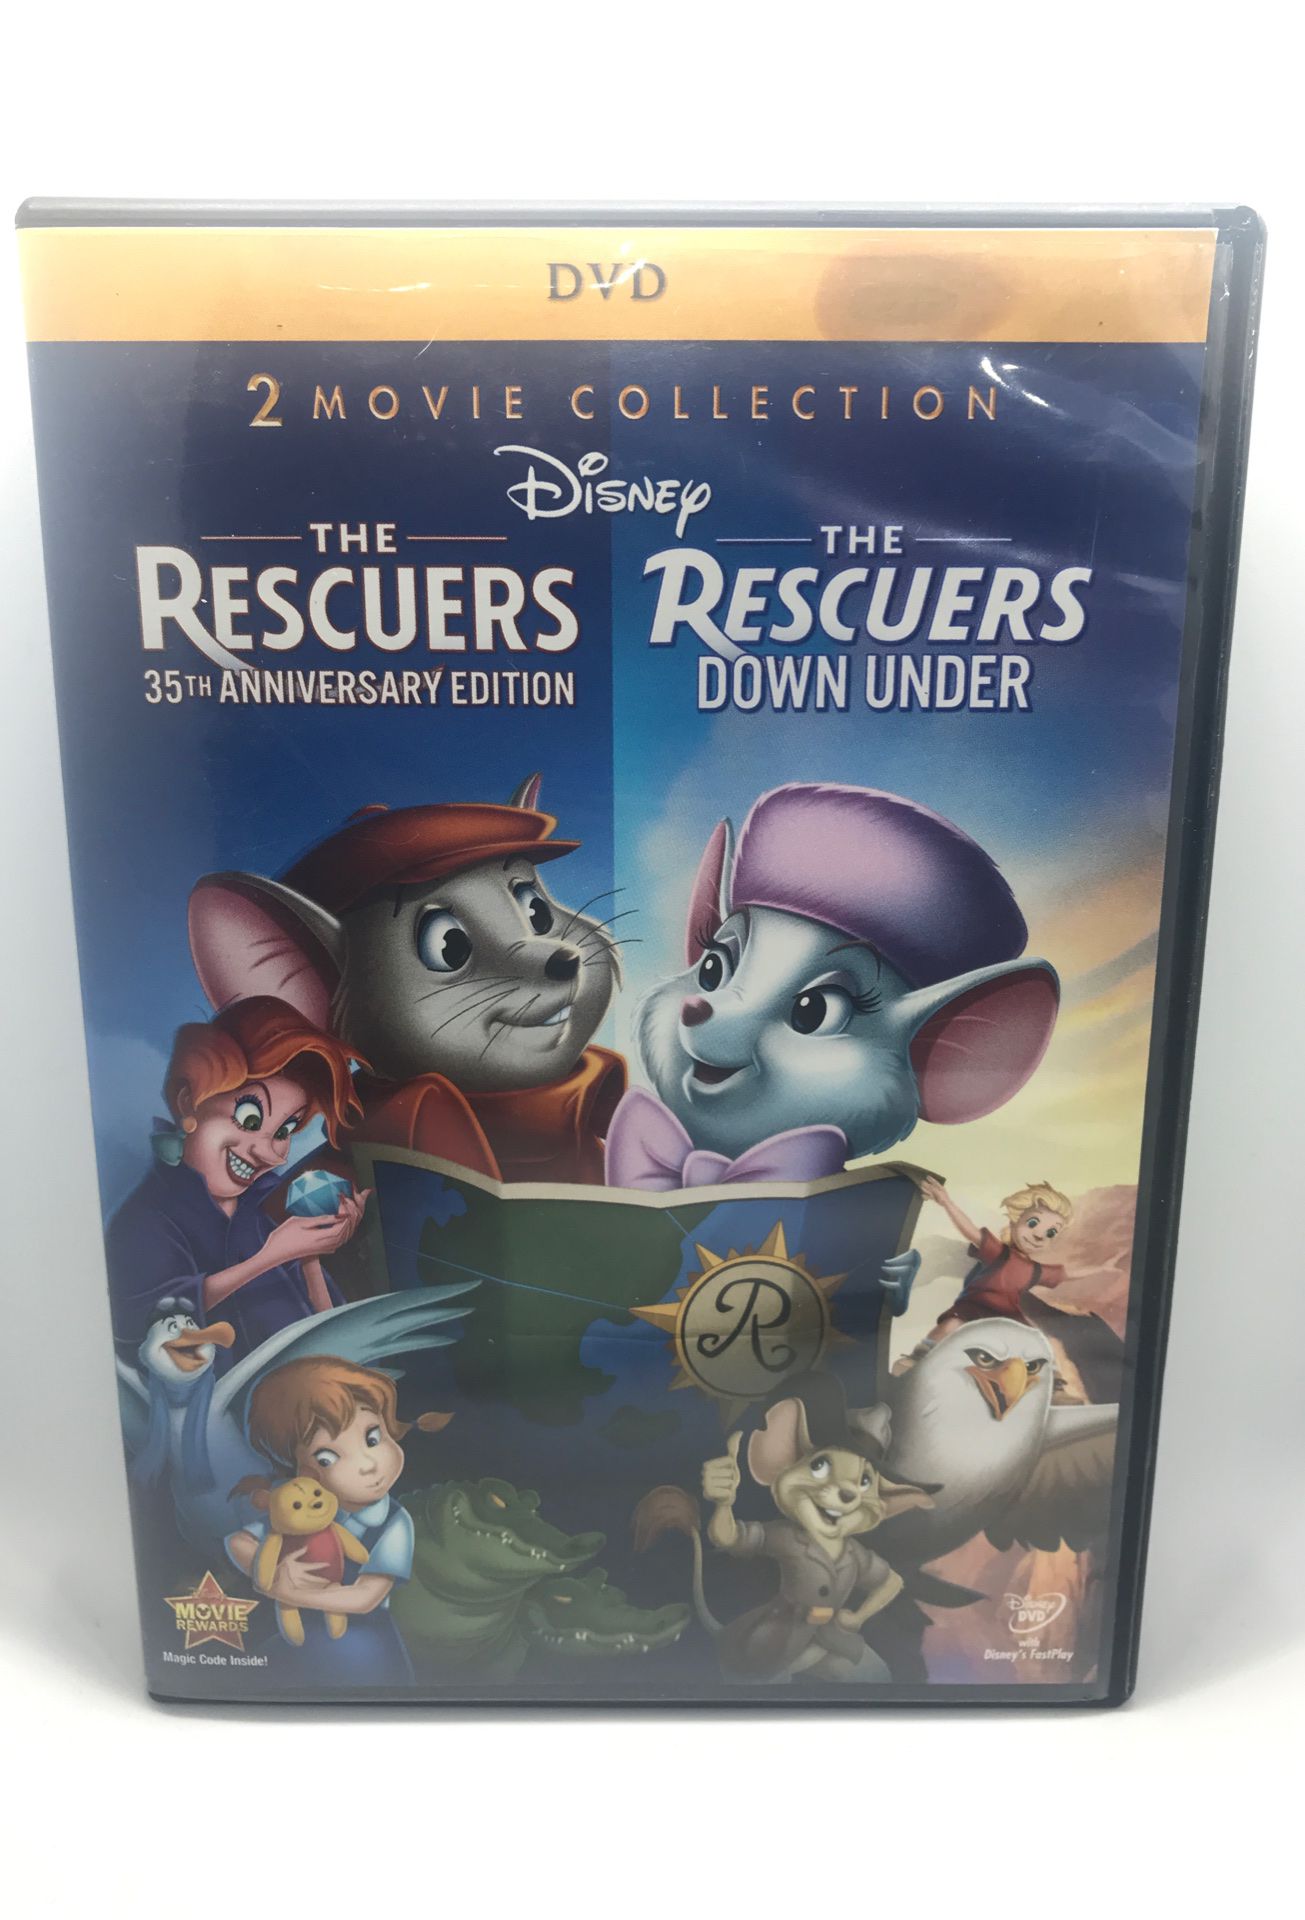 Disney’s The Rescuers & Rescuers Down Under DVD